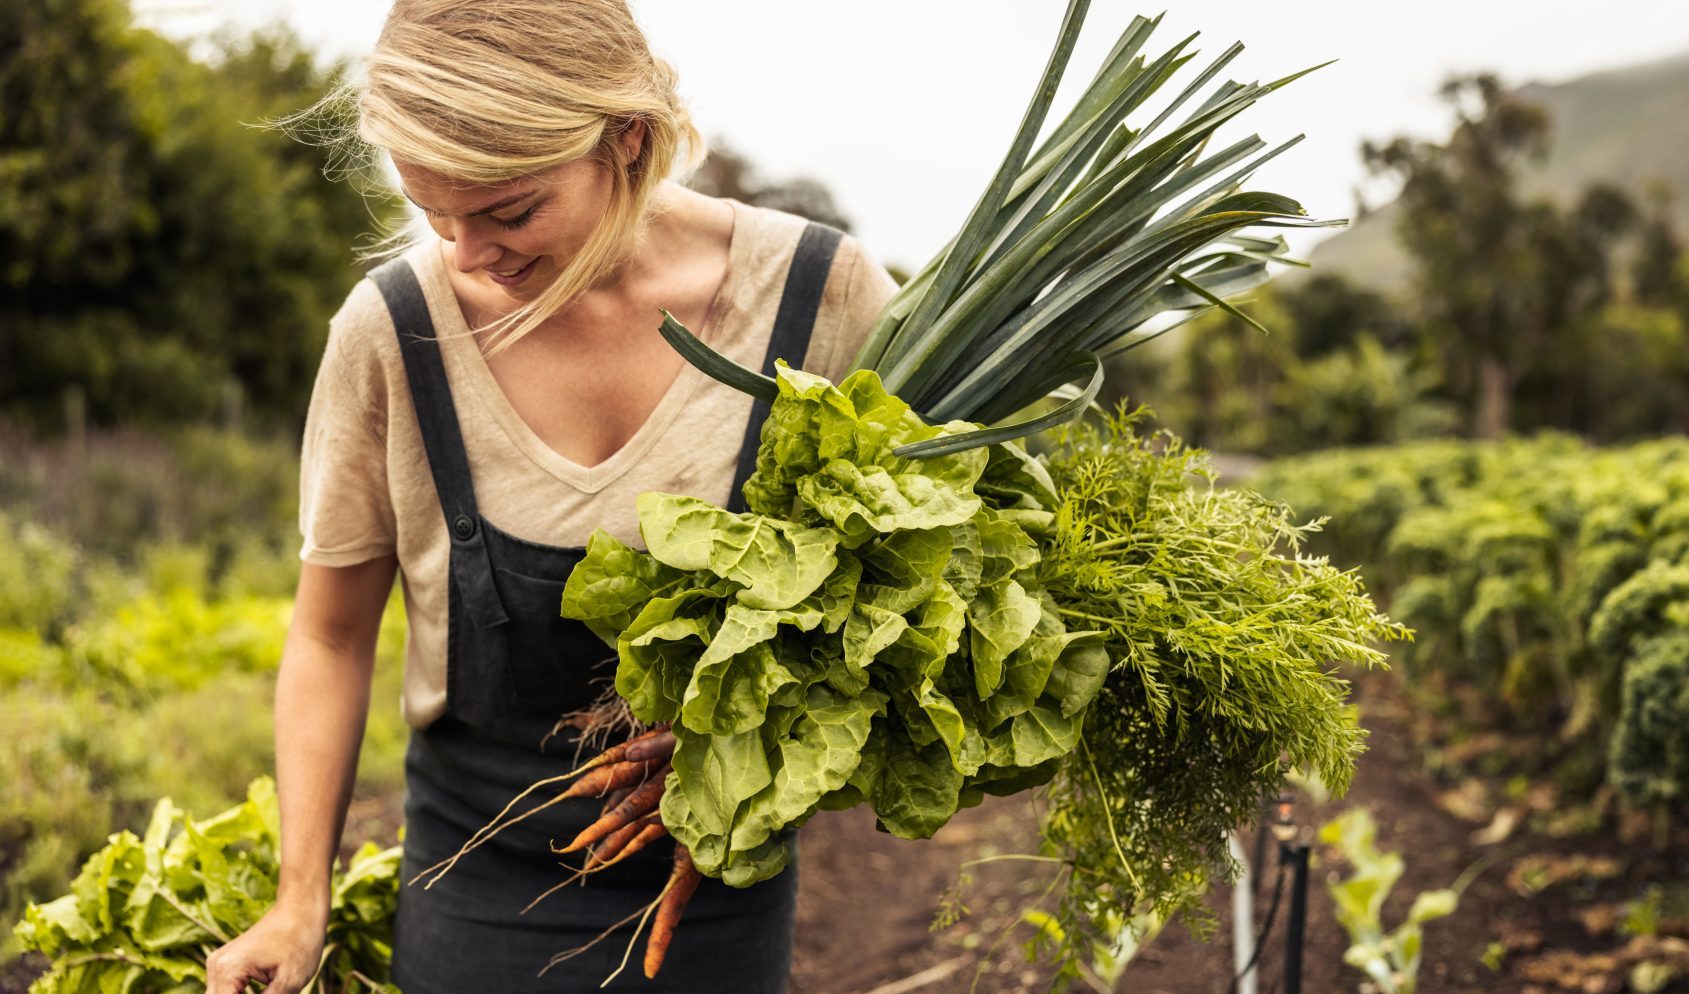 Happy organic farmer holding freshly picked vegetables in an agricultural field. Self-sustainable young woman gathering fresh green produce in her garden during harvest season.